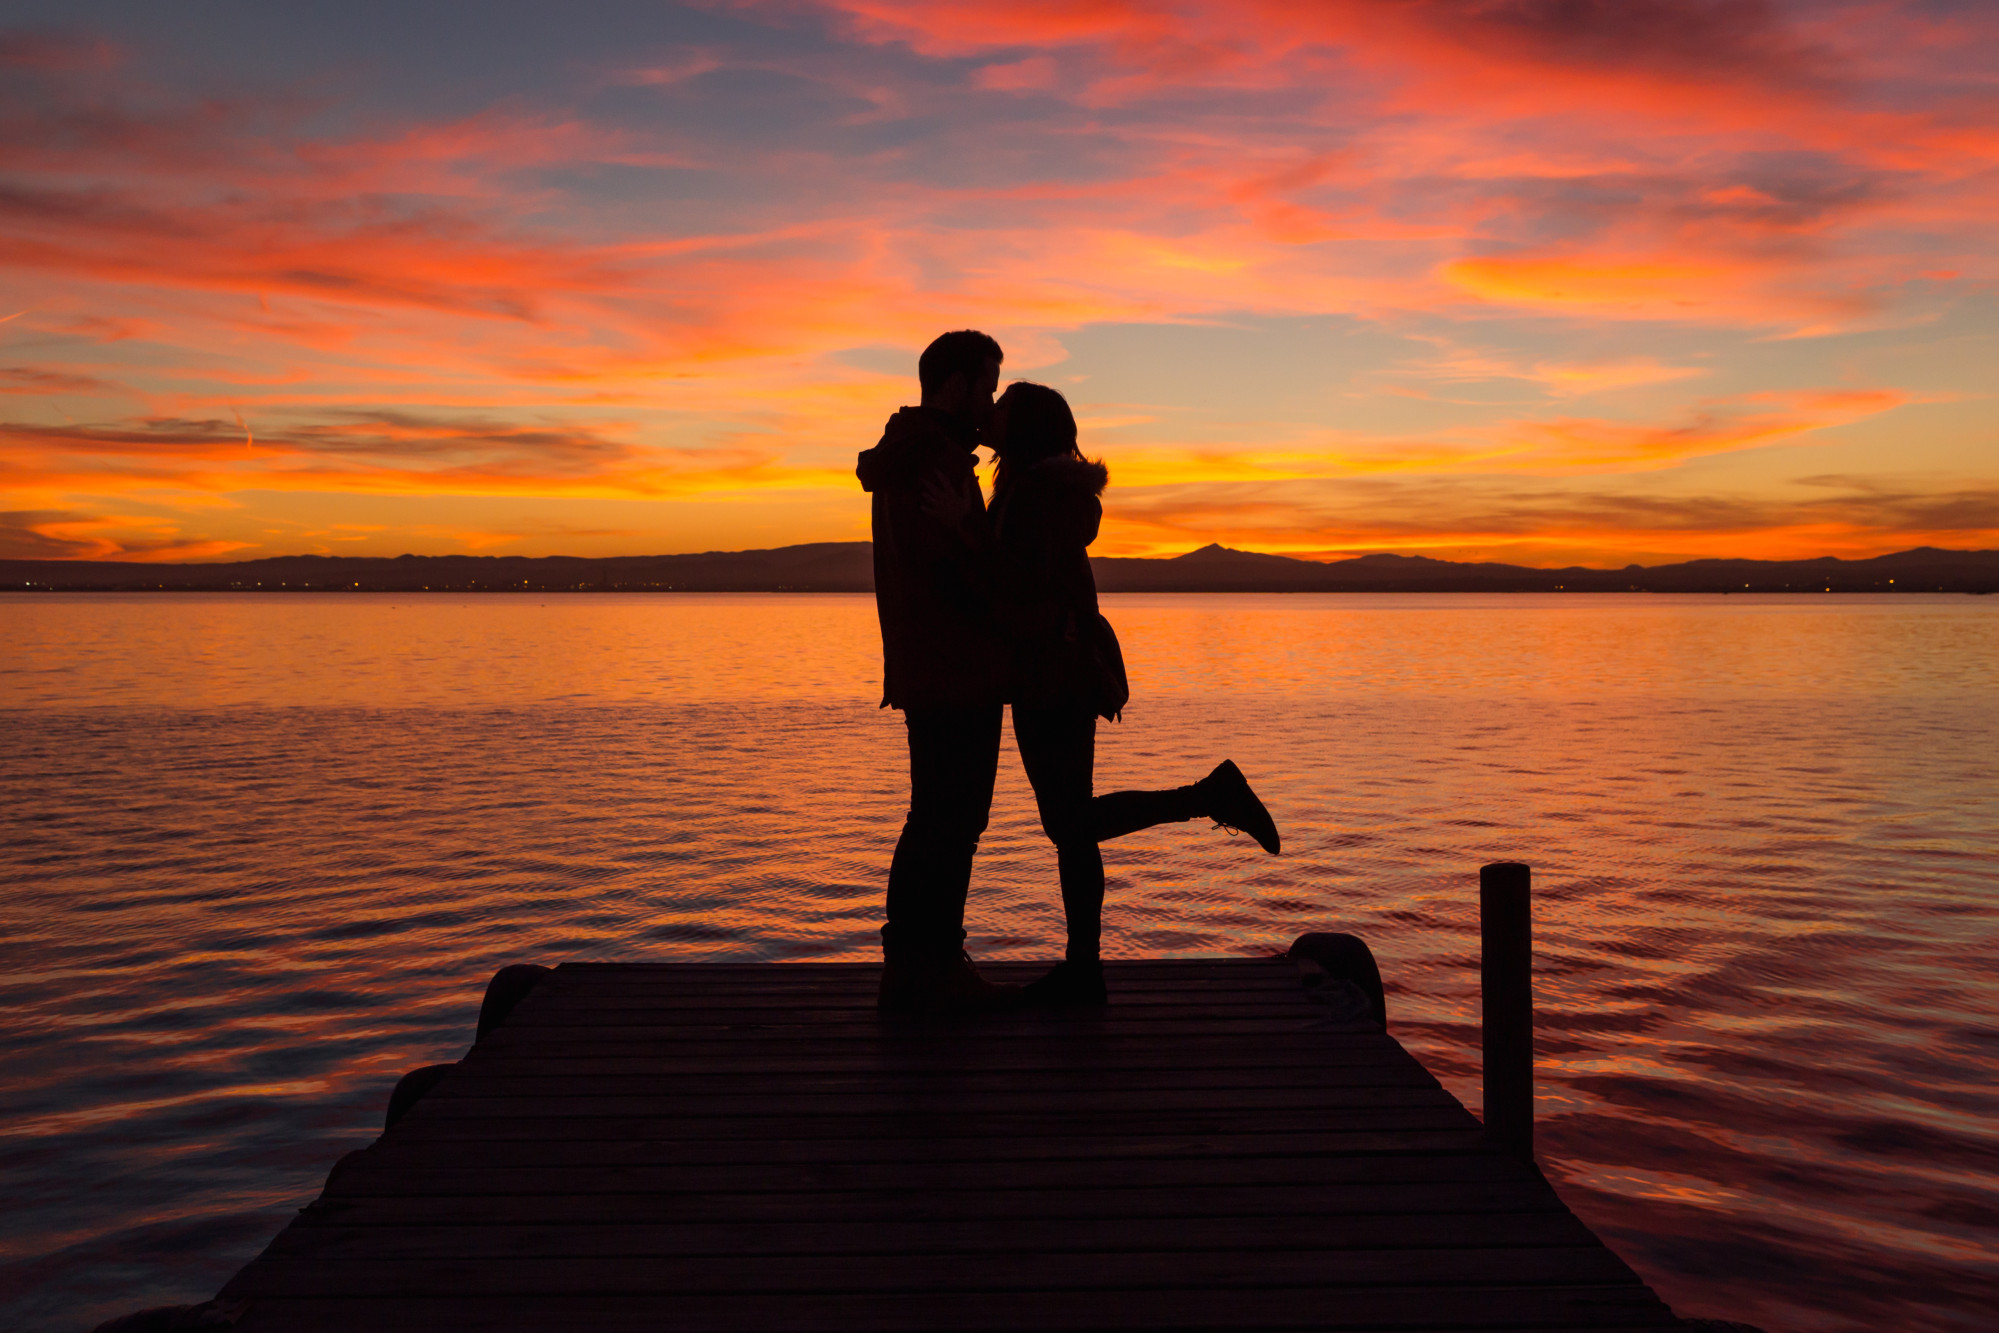 The couple were locked in a passionate embrace by the side of a lake when the man’s eardrum ruptured. Photo: Shutterstock